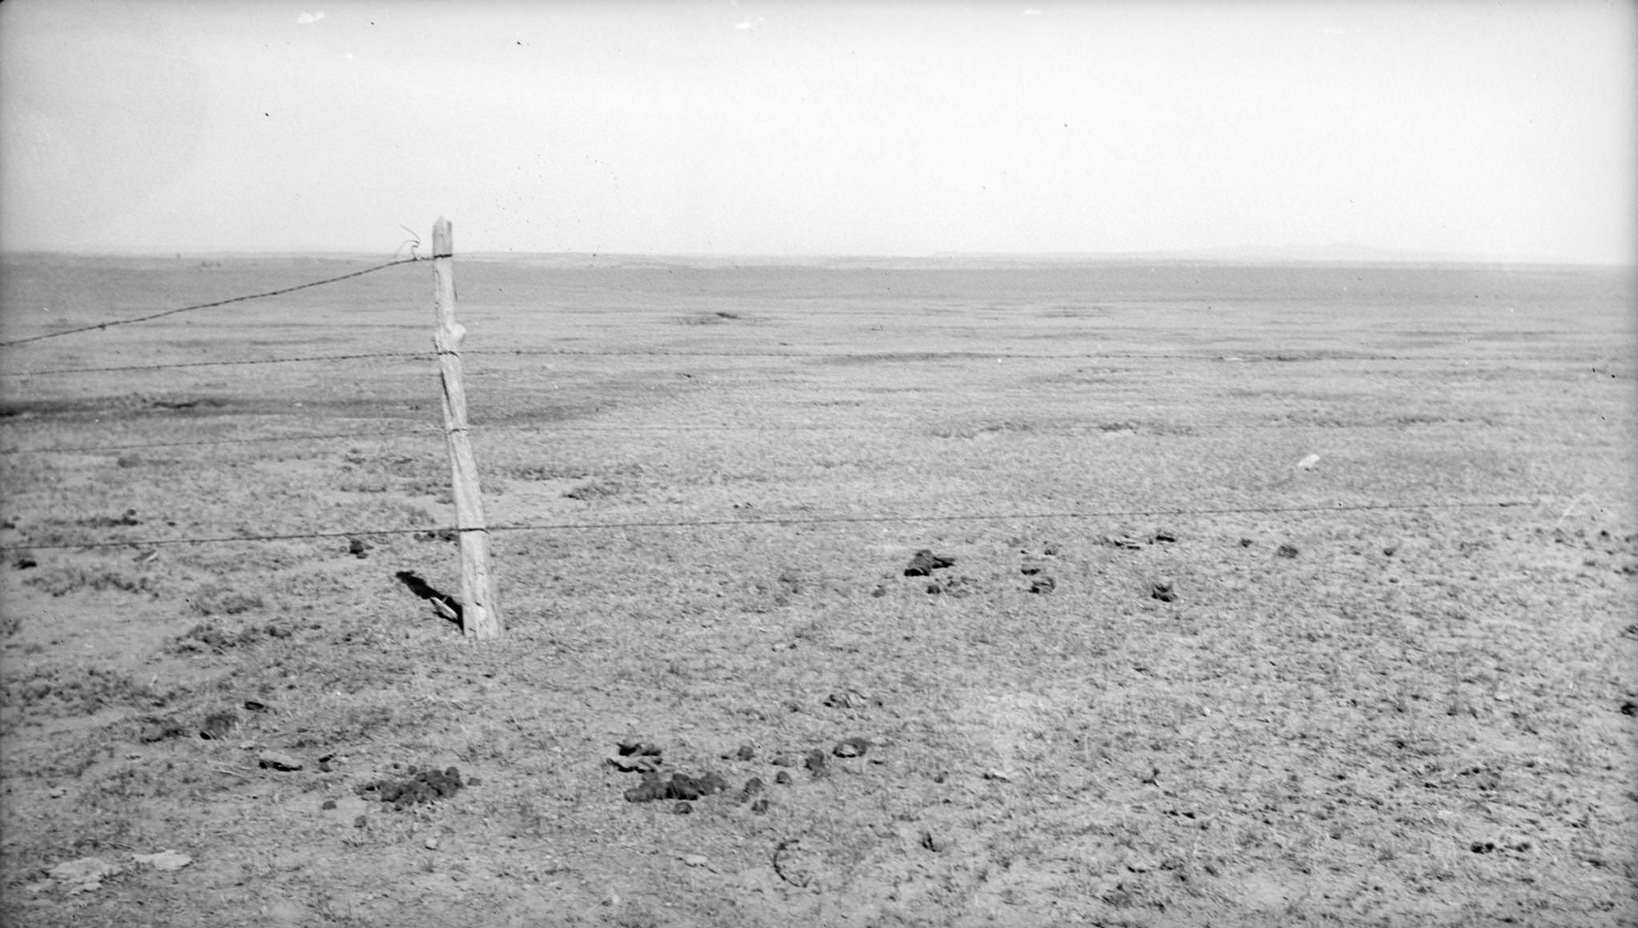 Stand of vega grass eaten off close. In good seasons hay can be cut from areas like this, New Mexico, 1934